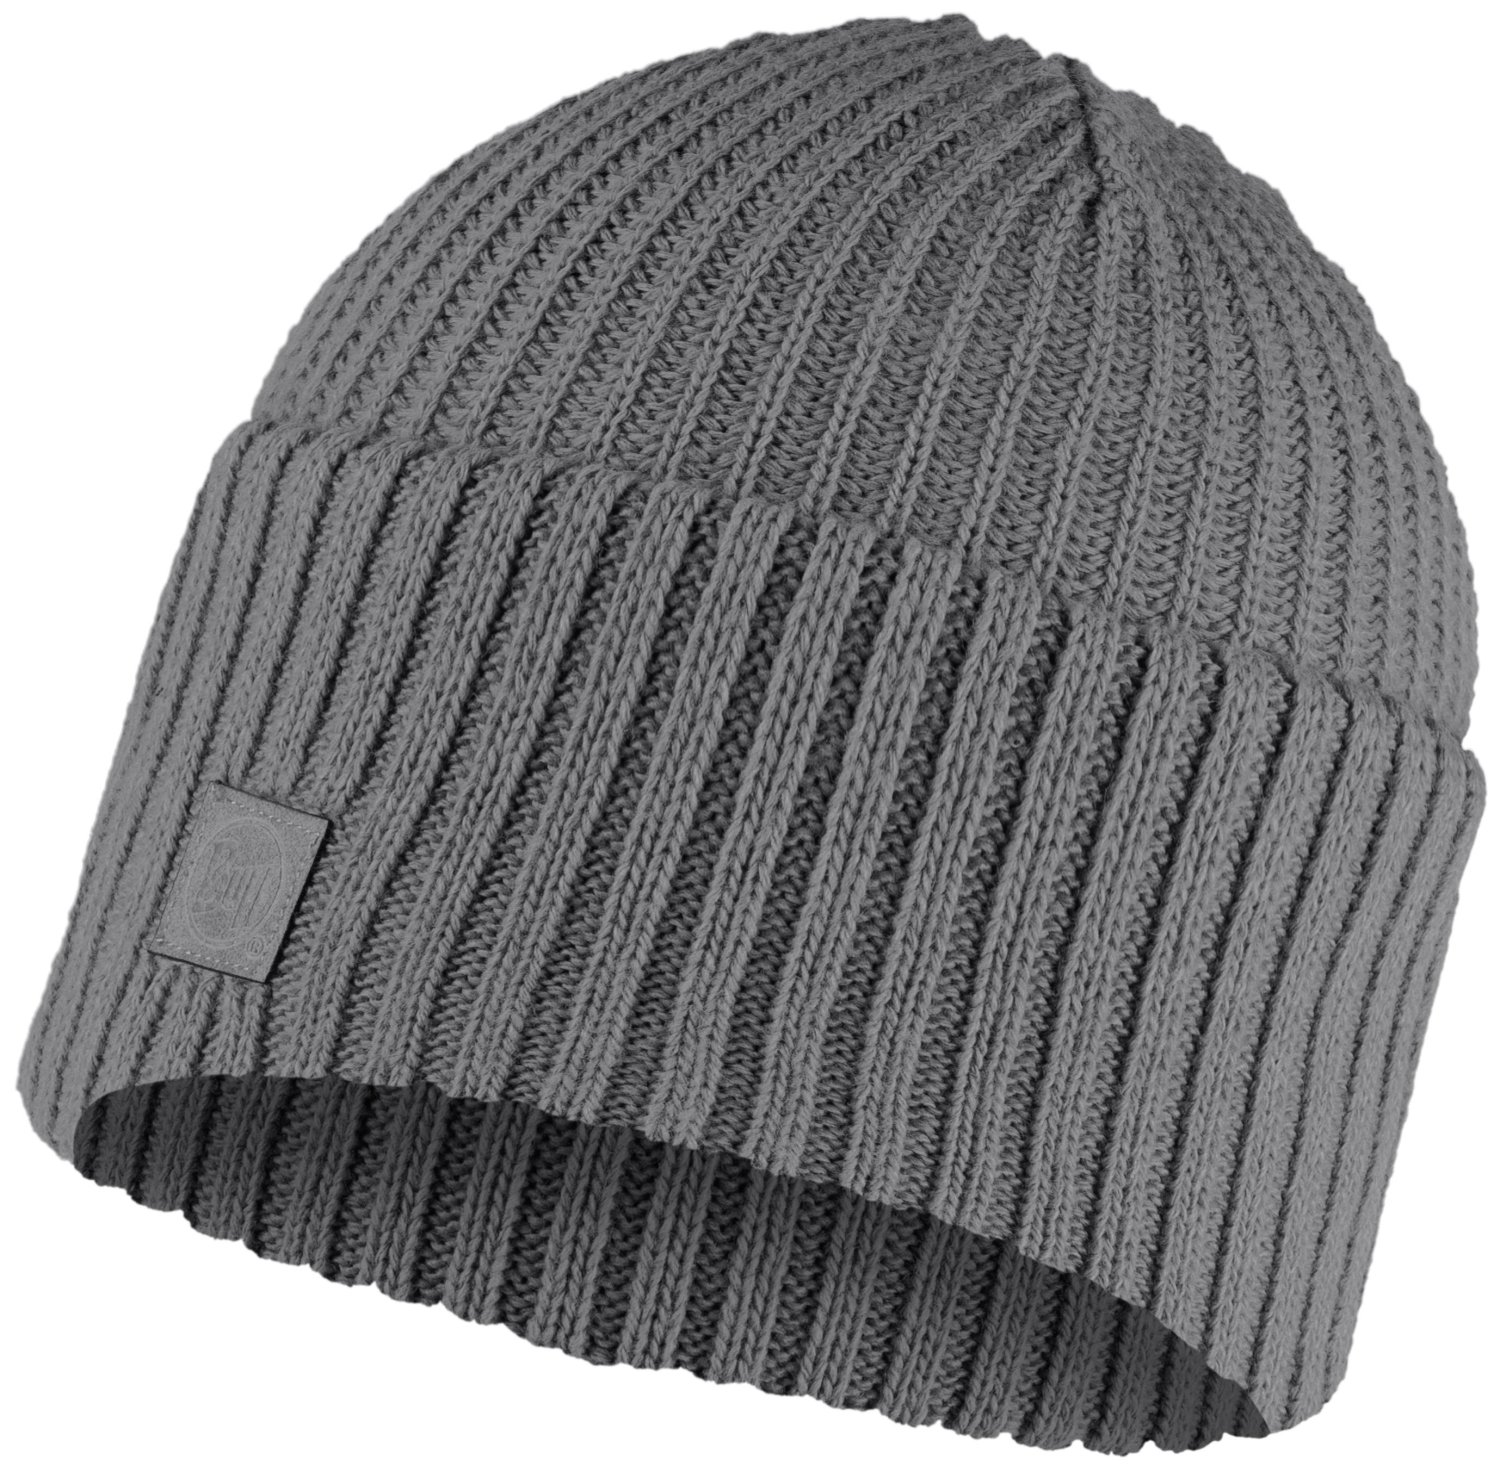 Шапка Buff Knitted Hat Rutger Grey Heather US:one size, 129694.938.10.00 шапка buff crossknit hat sold lihgt grey us one size 126483 933 10 00